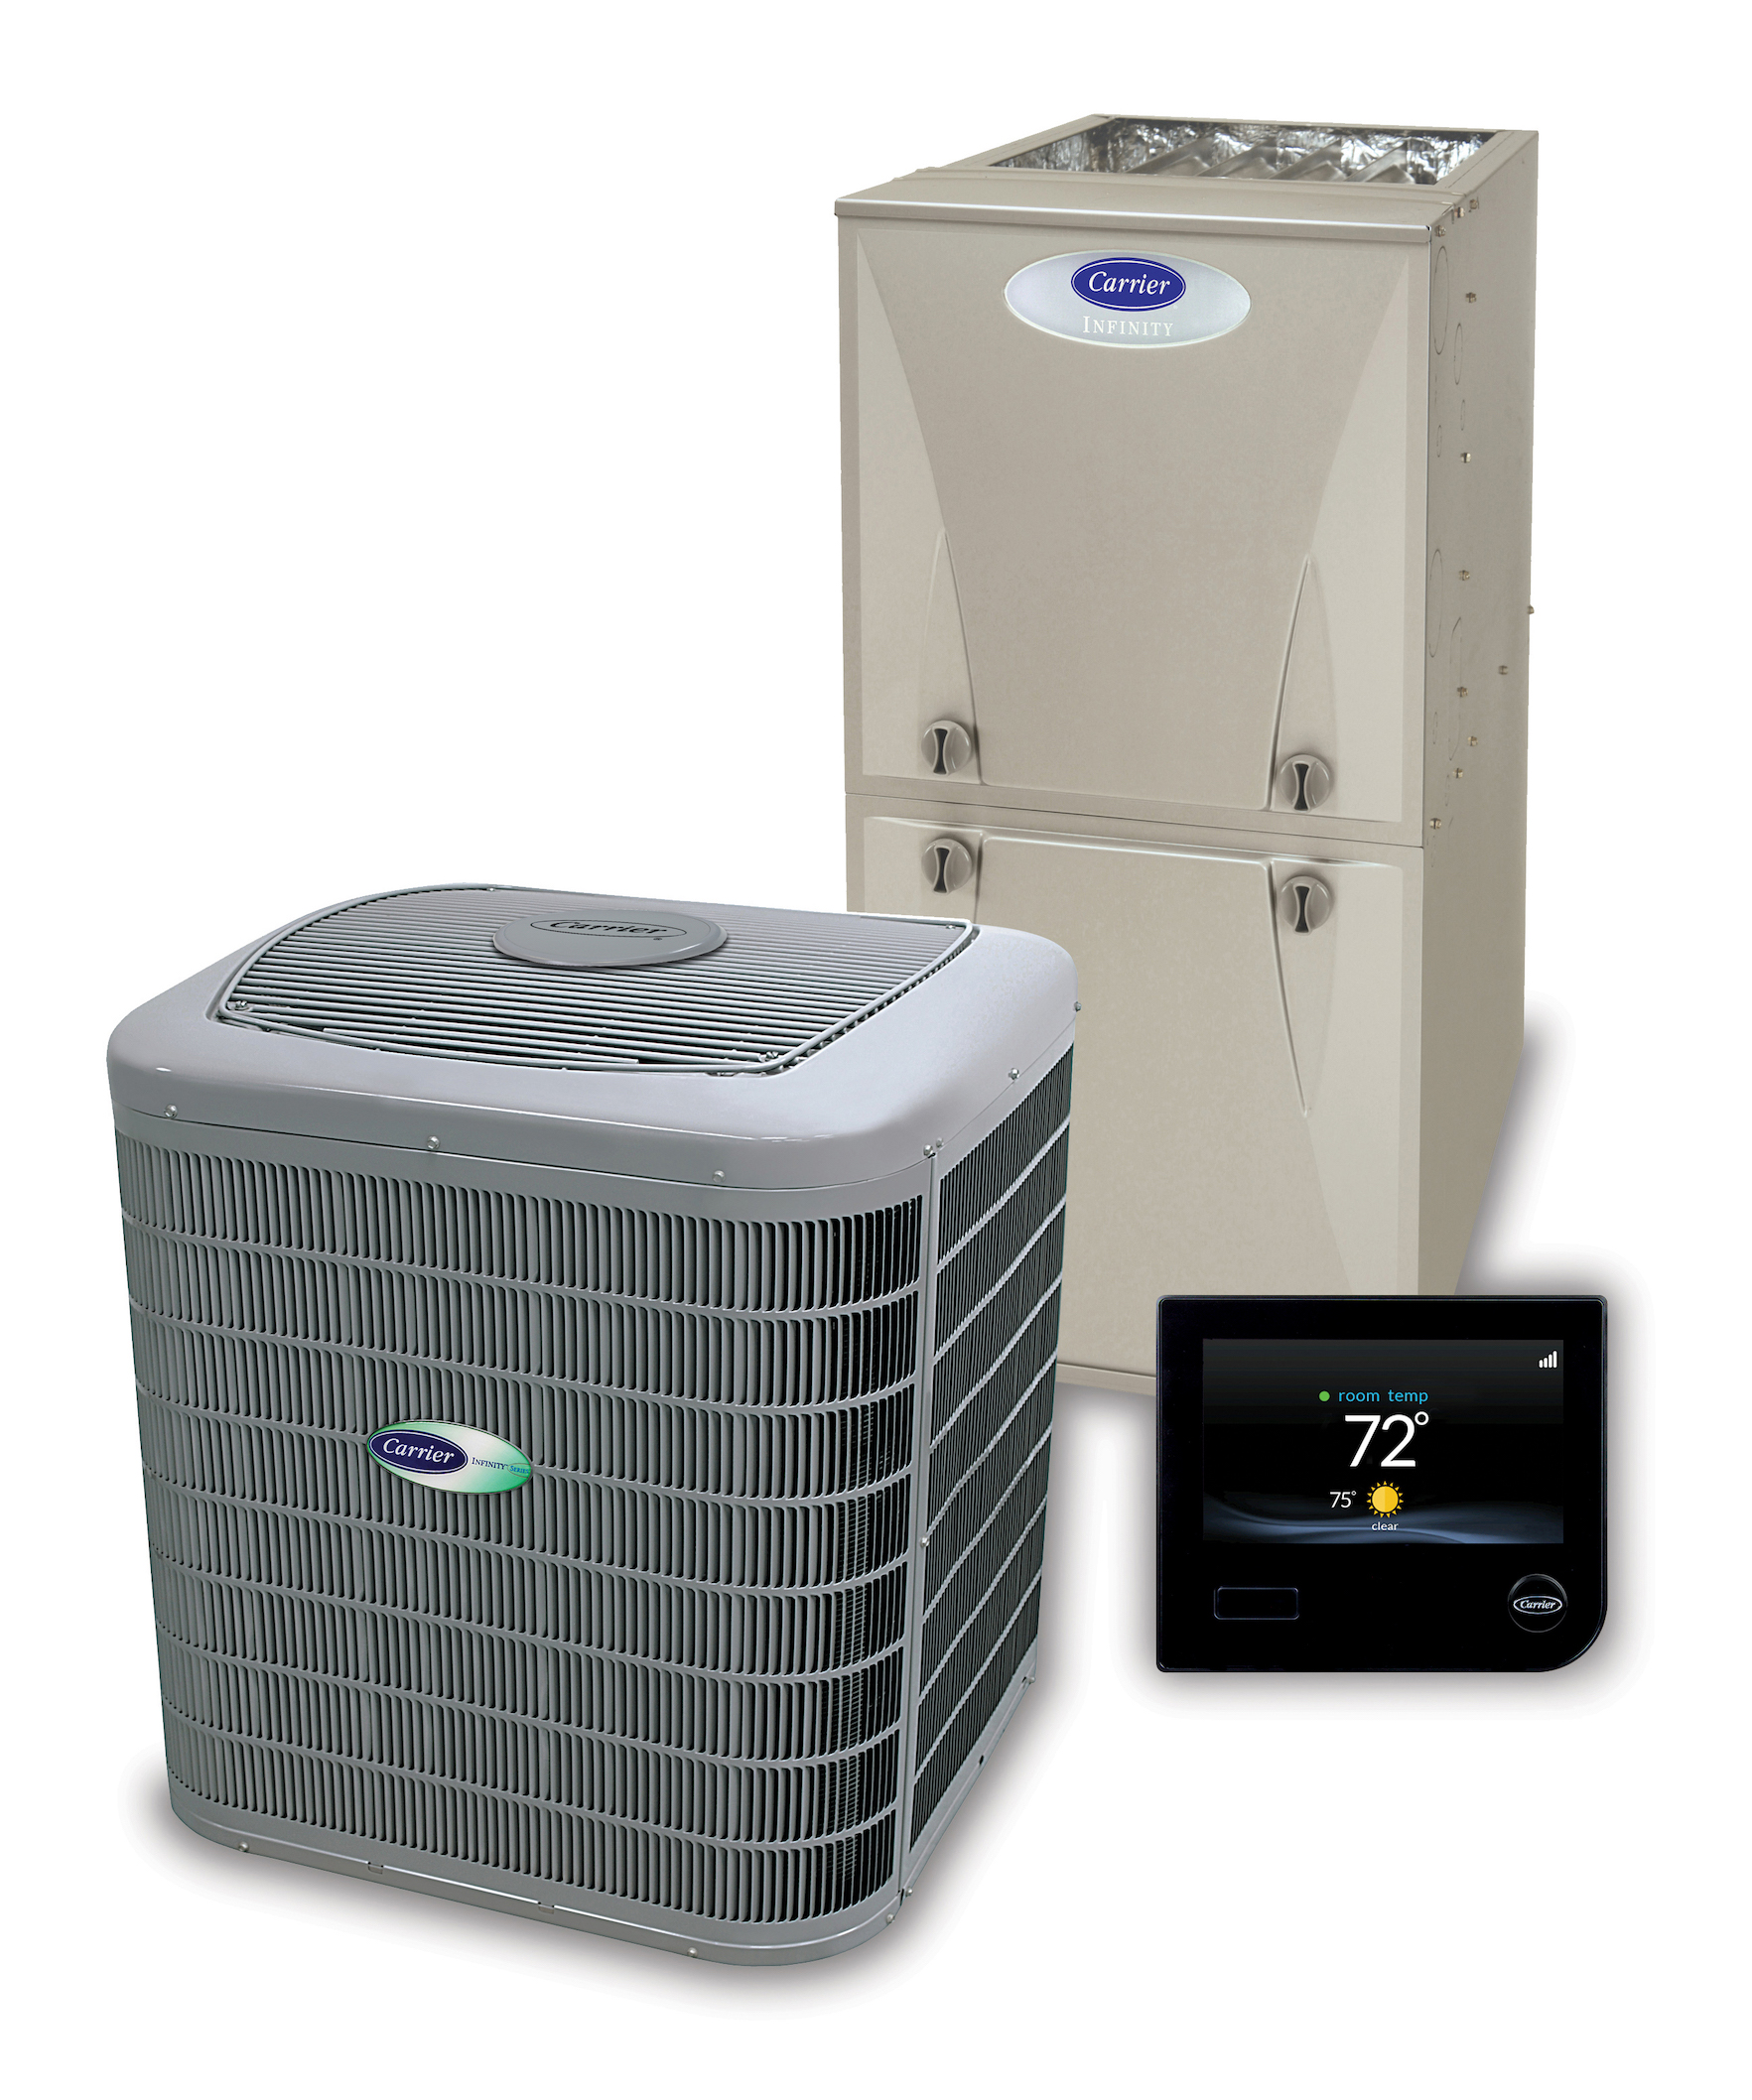 Carrier dealers in New England offer a wide variety of heating, cooling, ductless and indoor air quality products